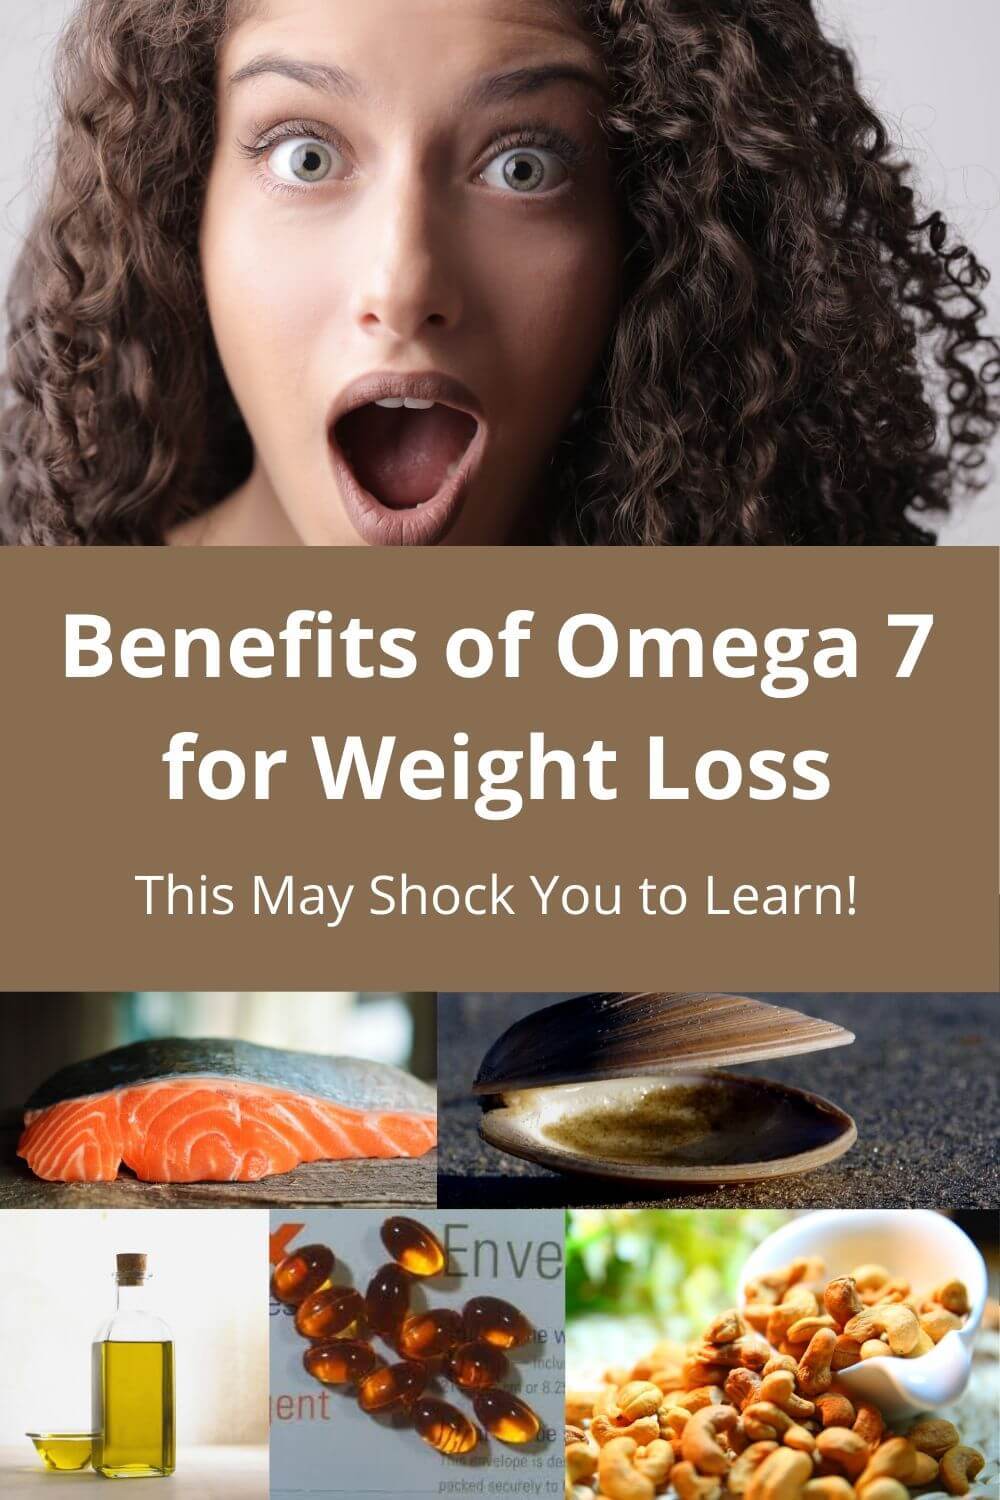 Bemefits of Omega 7 for Weight Loss